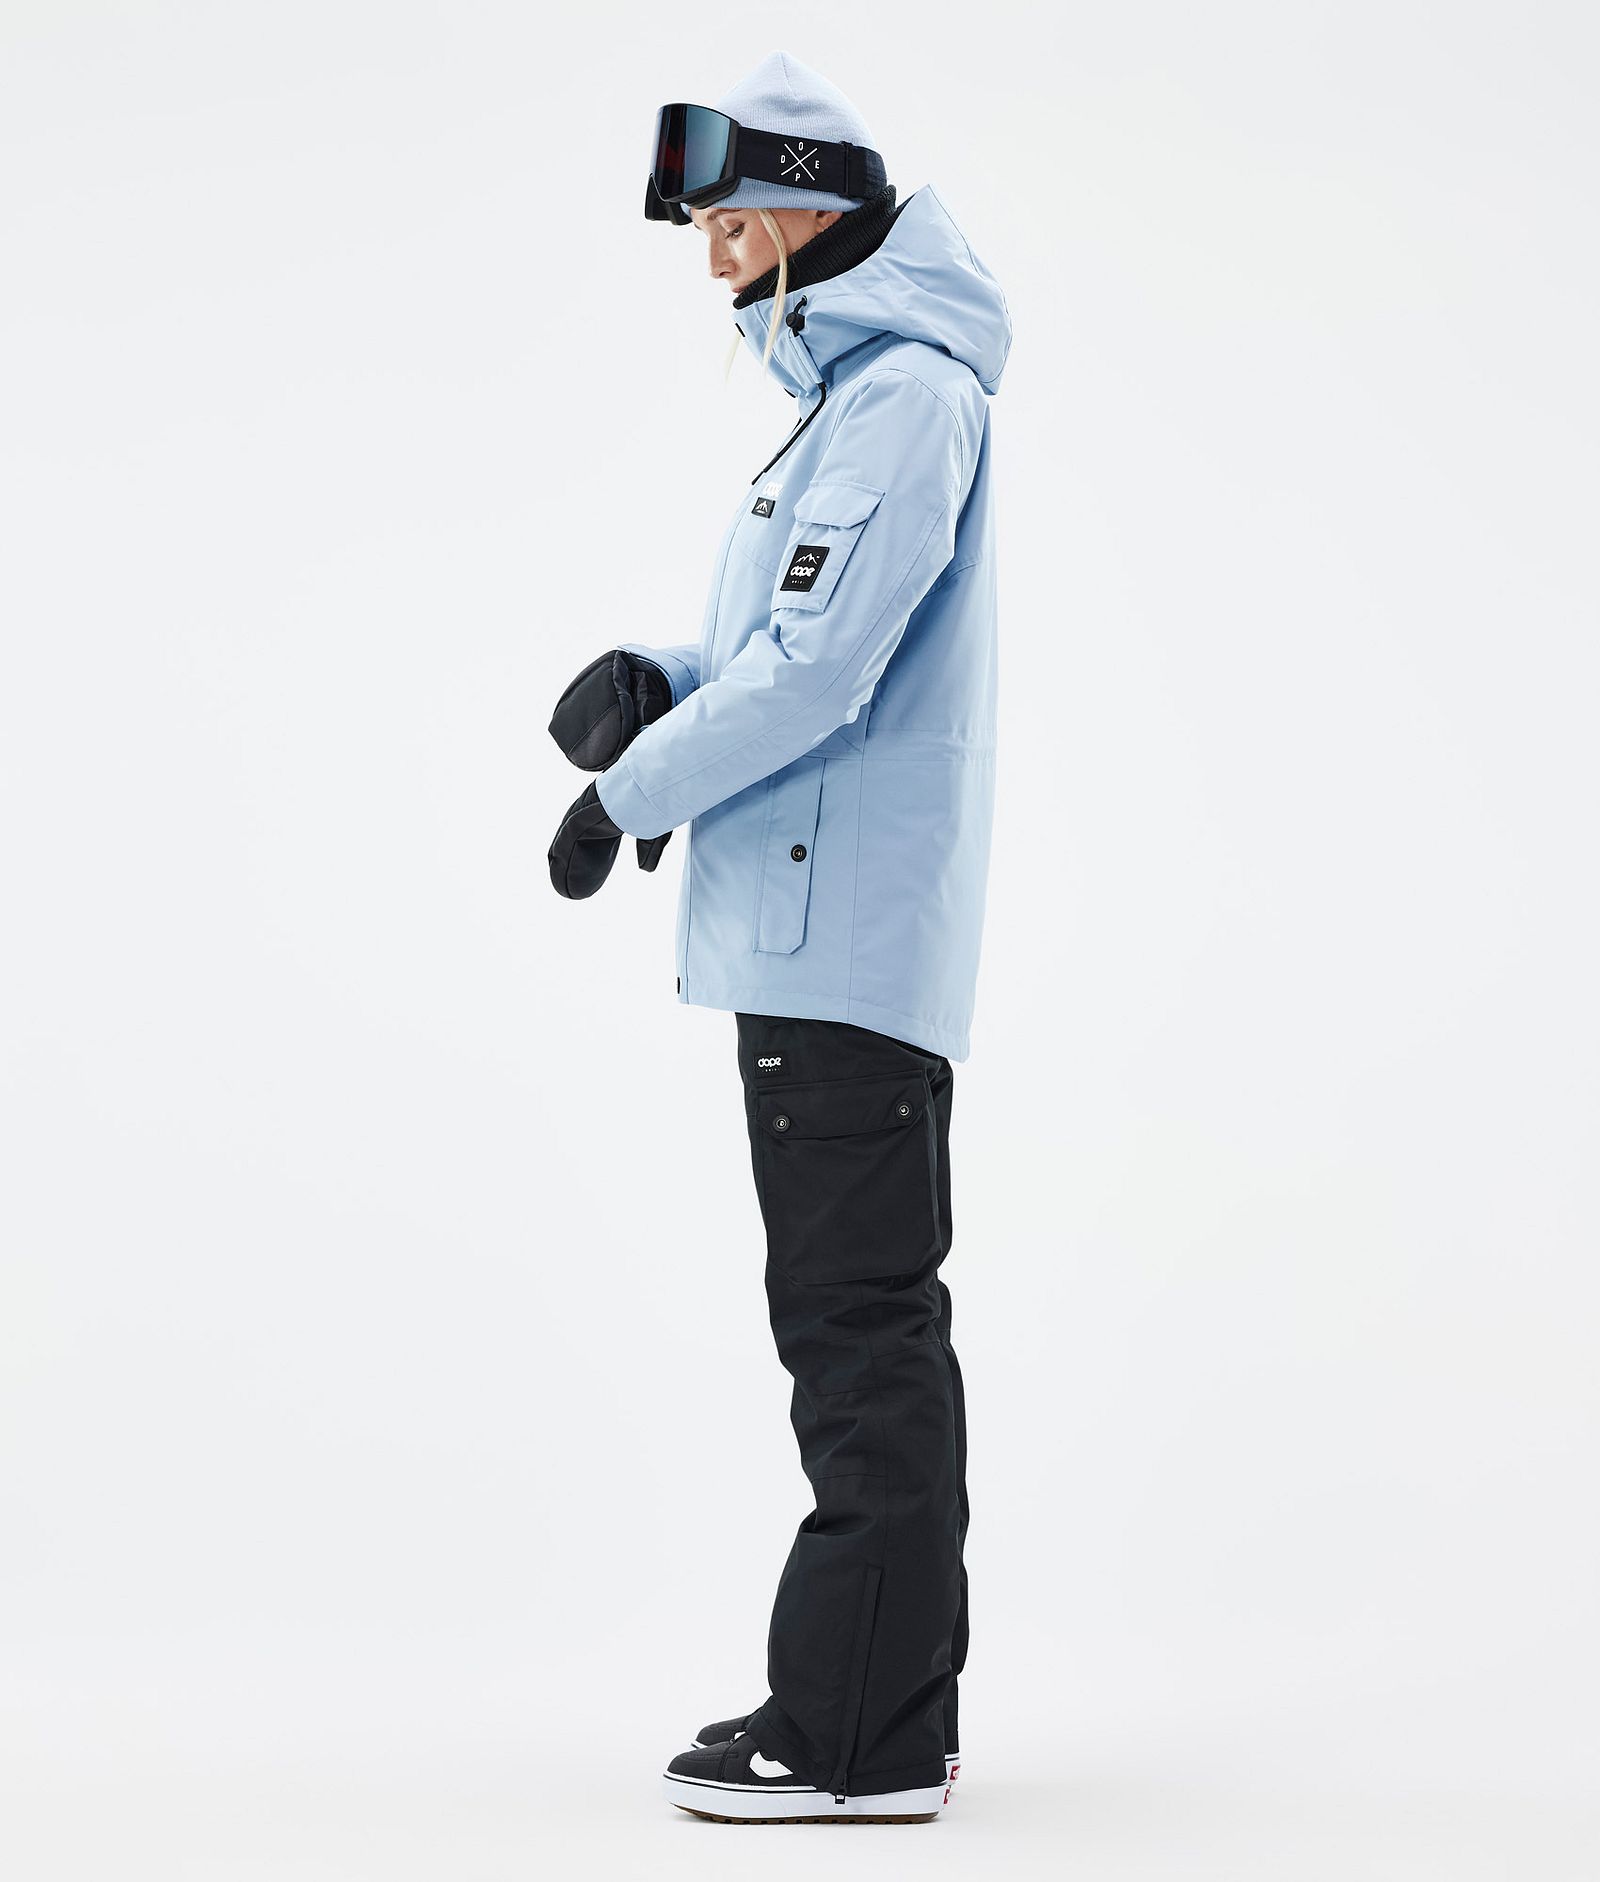 Adept W Giacca Snowboard Donna Light Blue